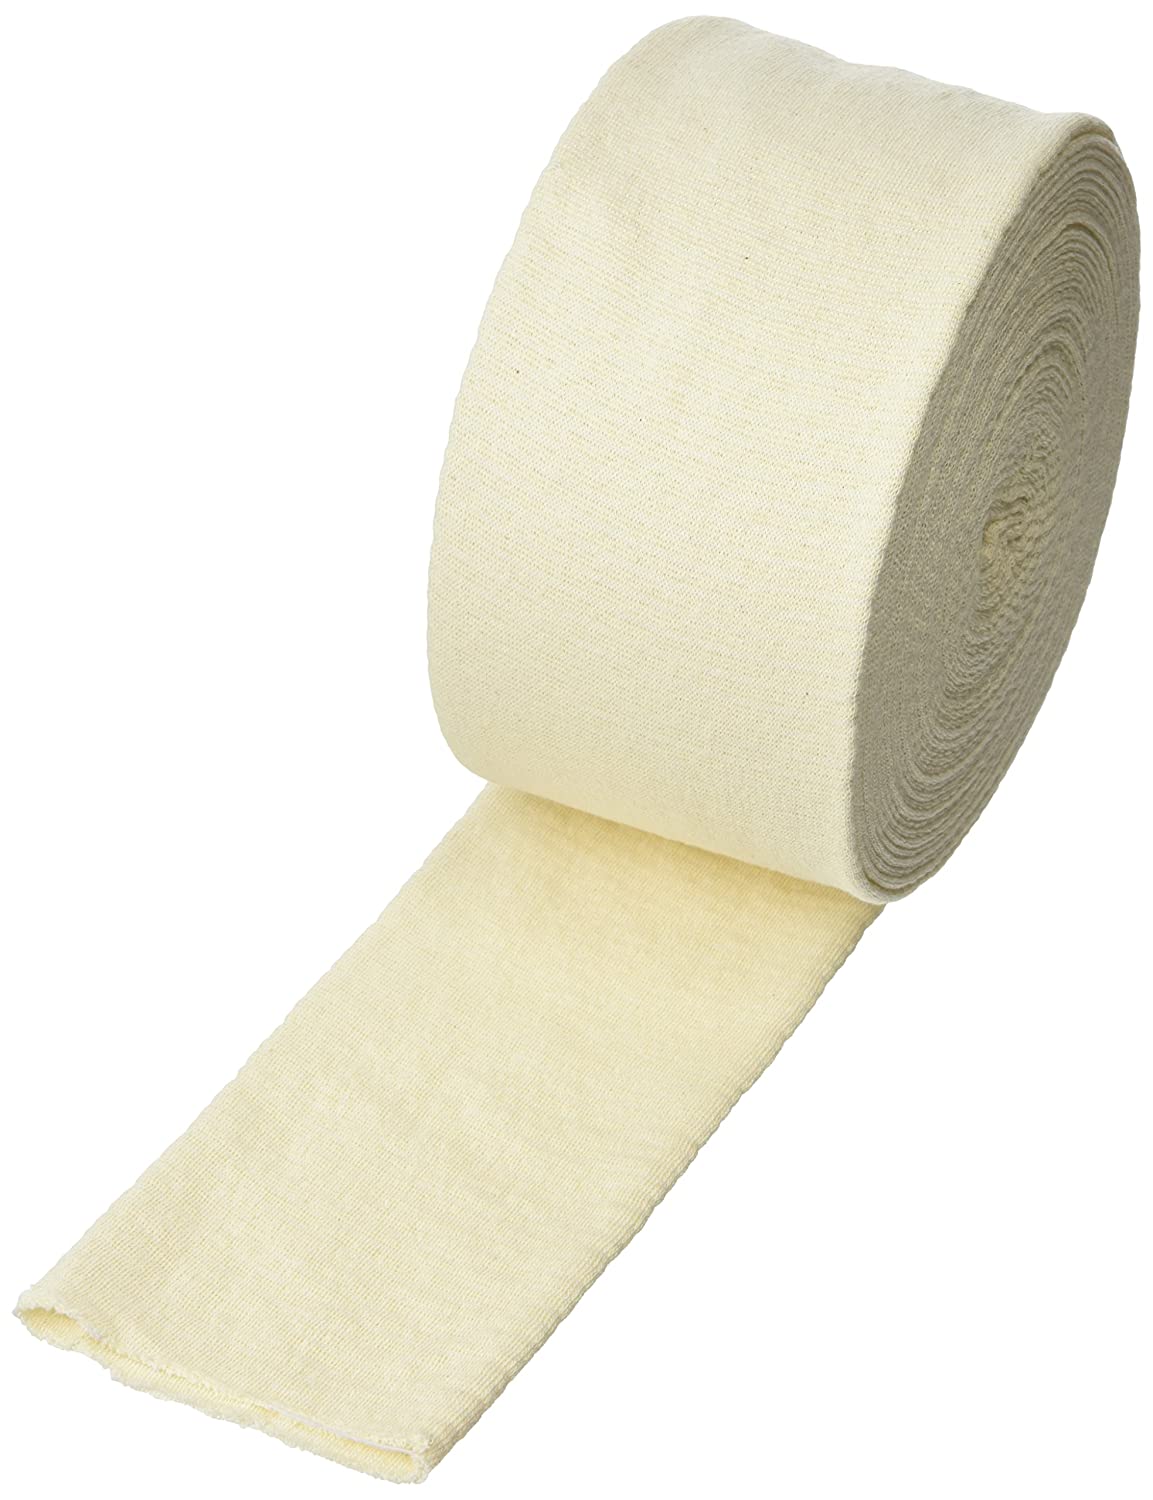 MOLNLYCKE HEALTH CARE 1438, DRESSING TUBIGRIP, SIZE F, NATURAL, 10M - To Your Door Medical  - Wound Care